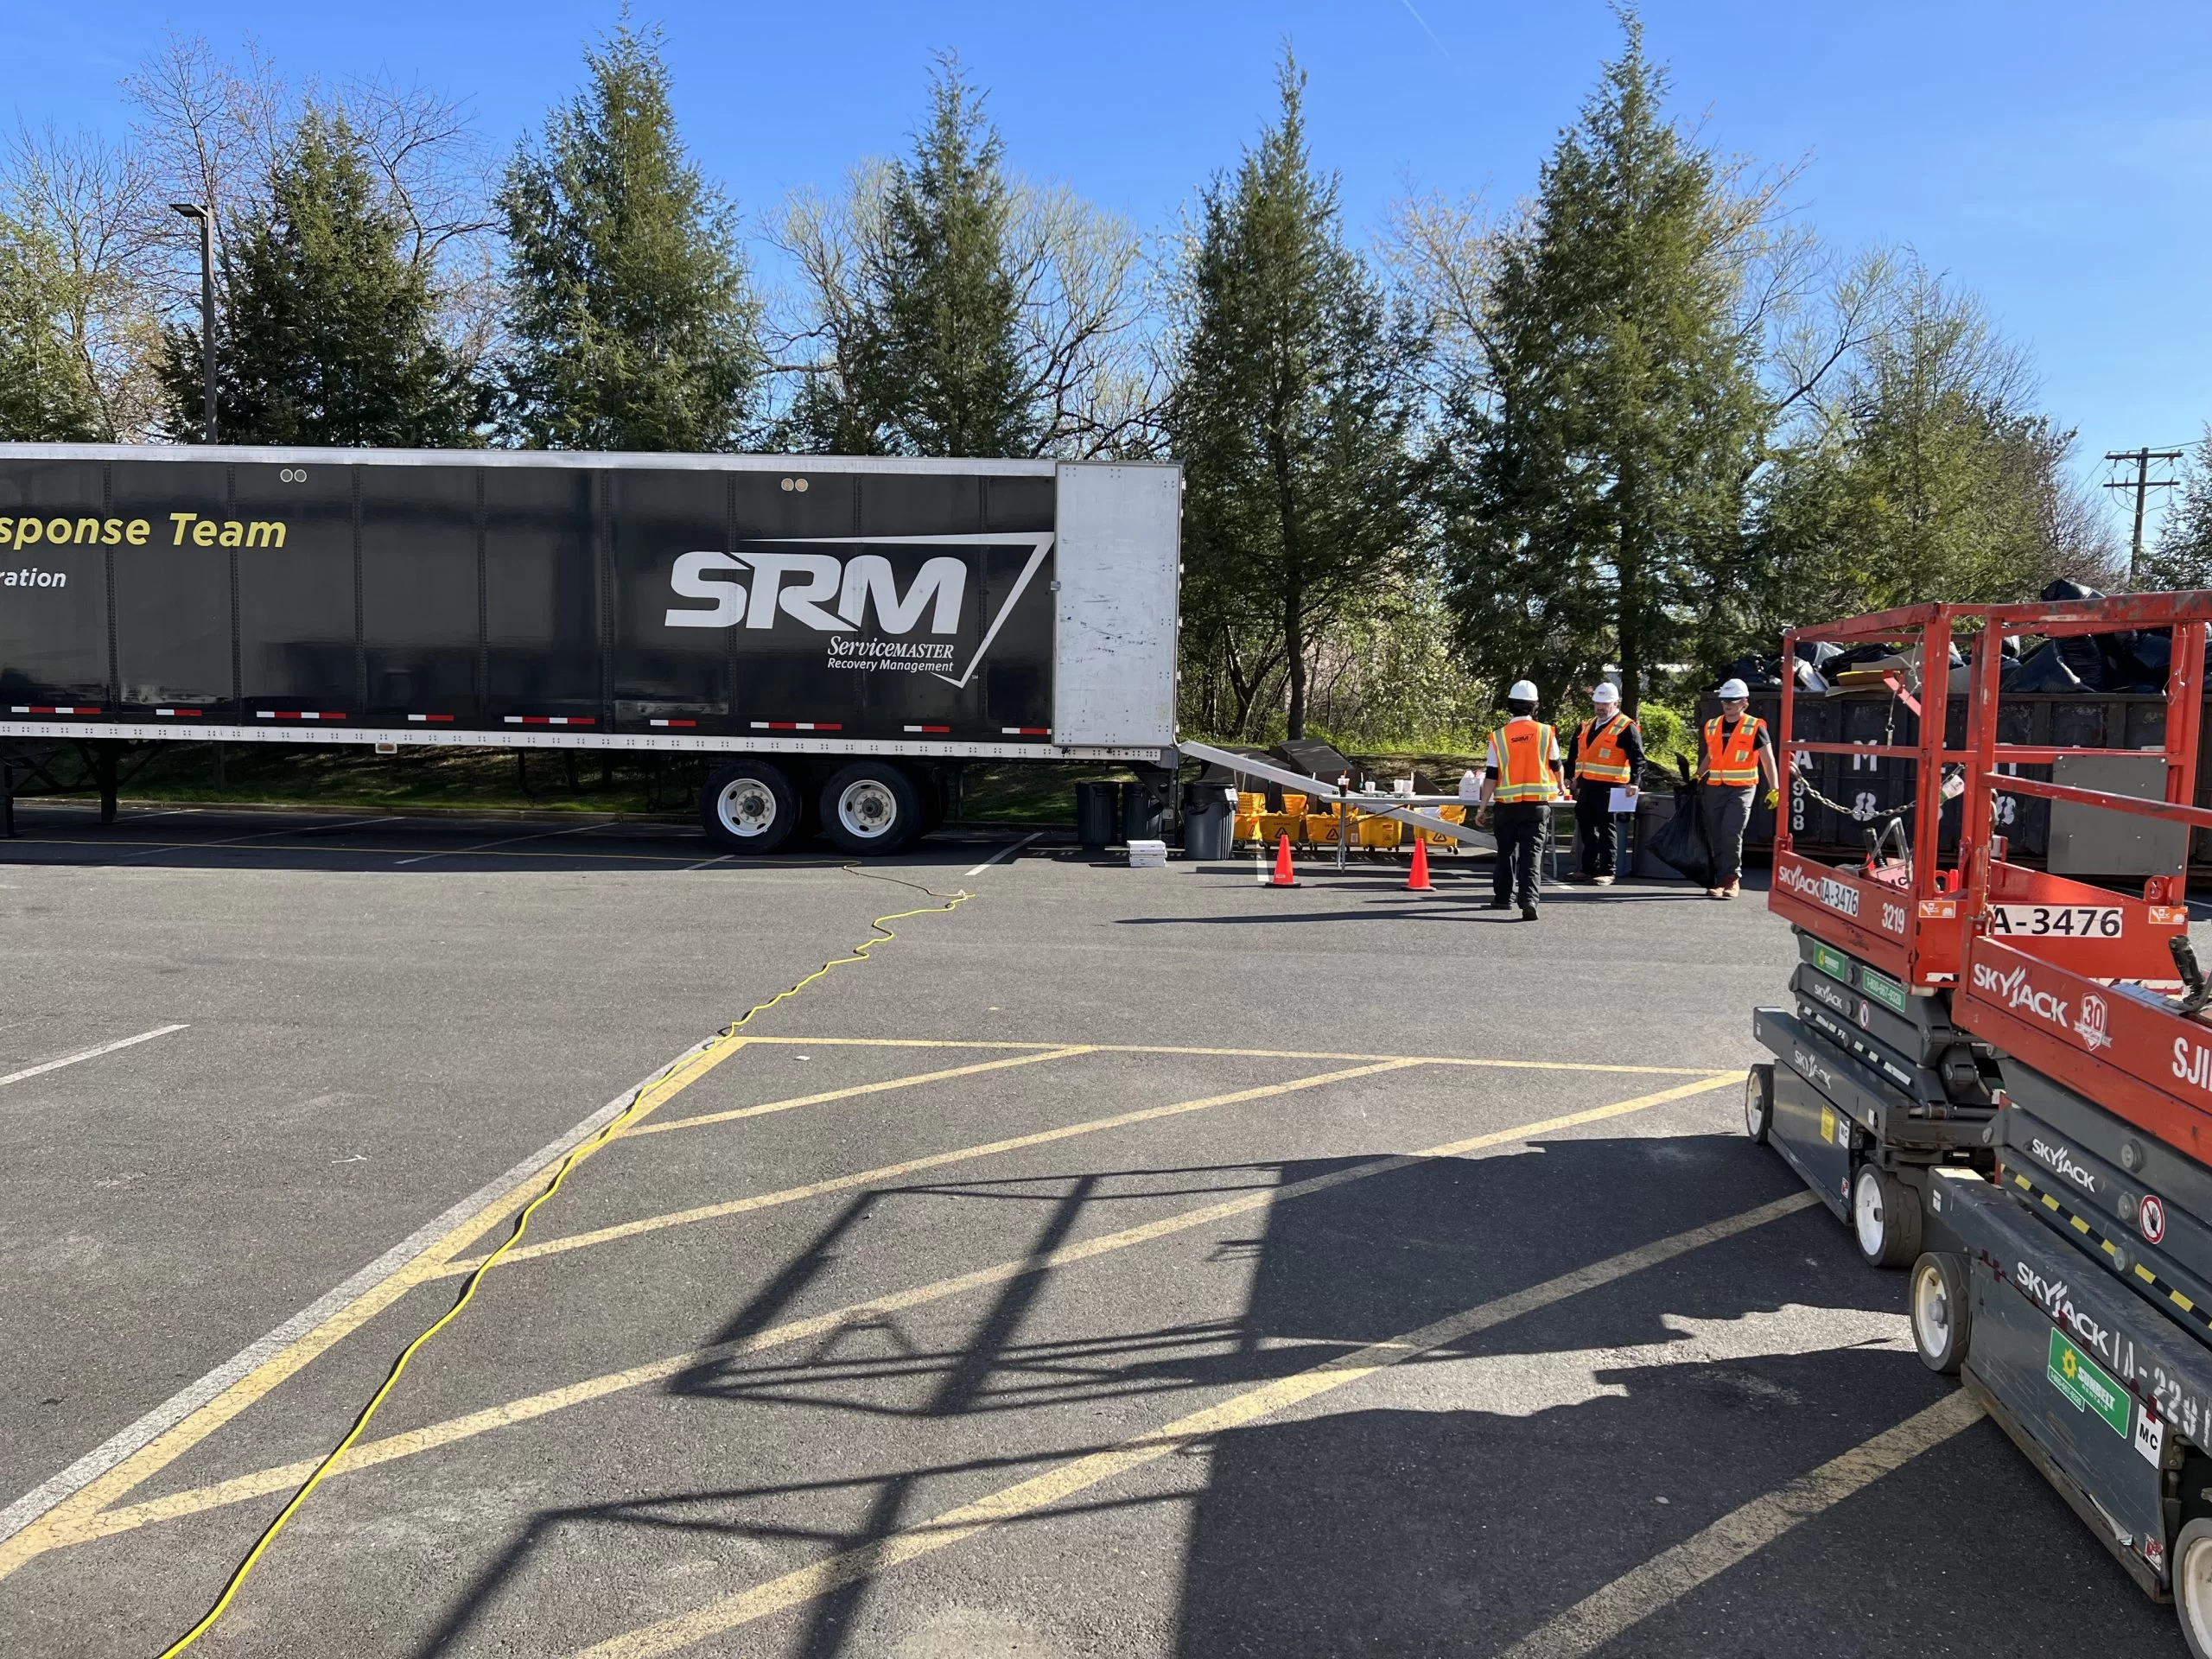 ServiceMaster Truck and moving equipment